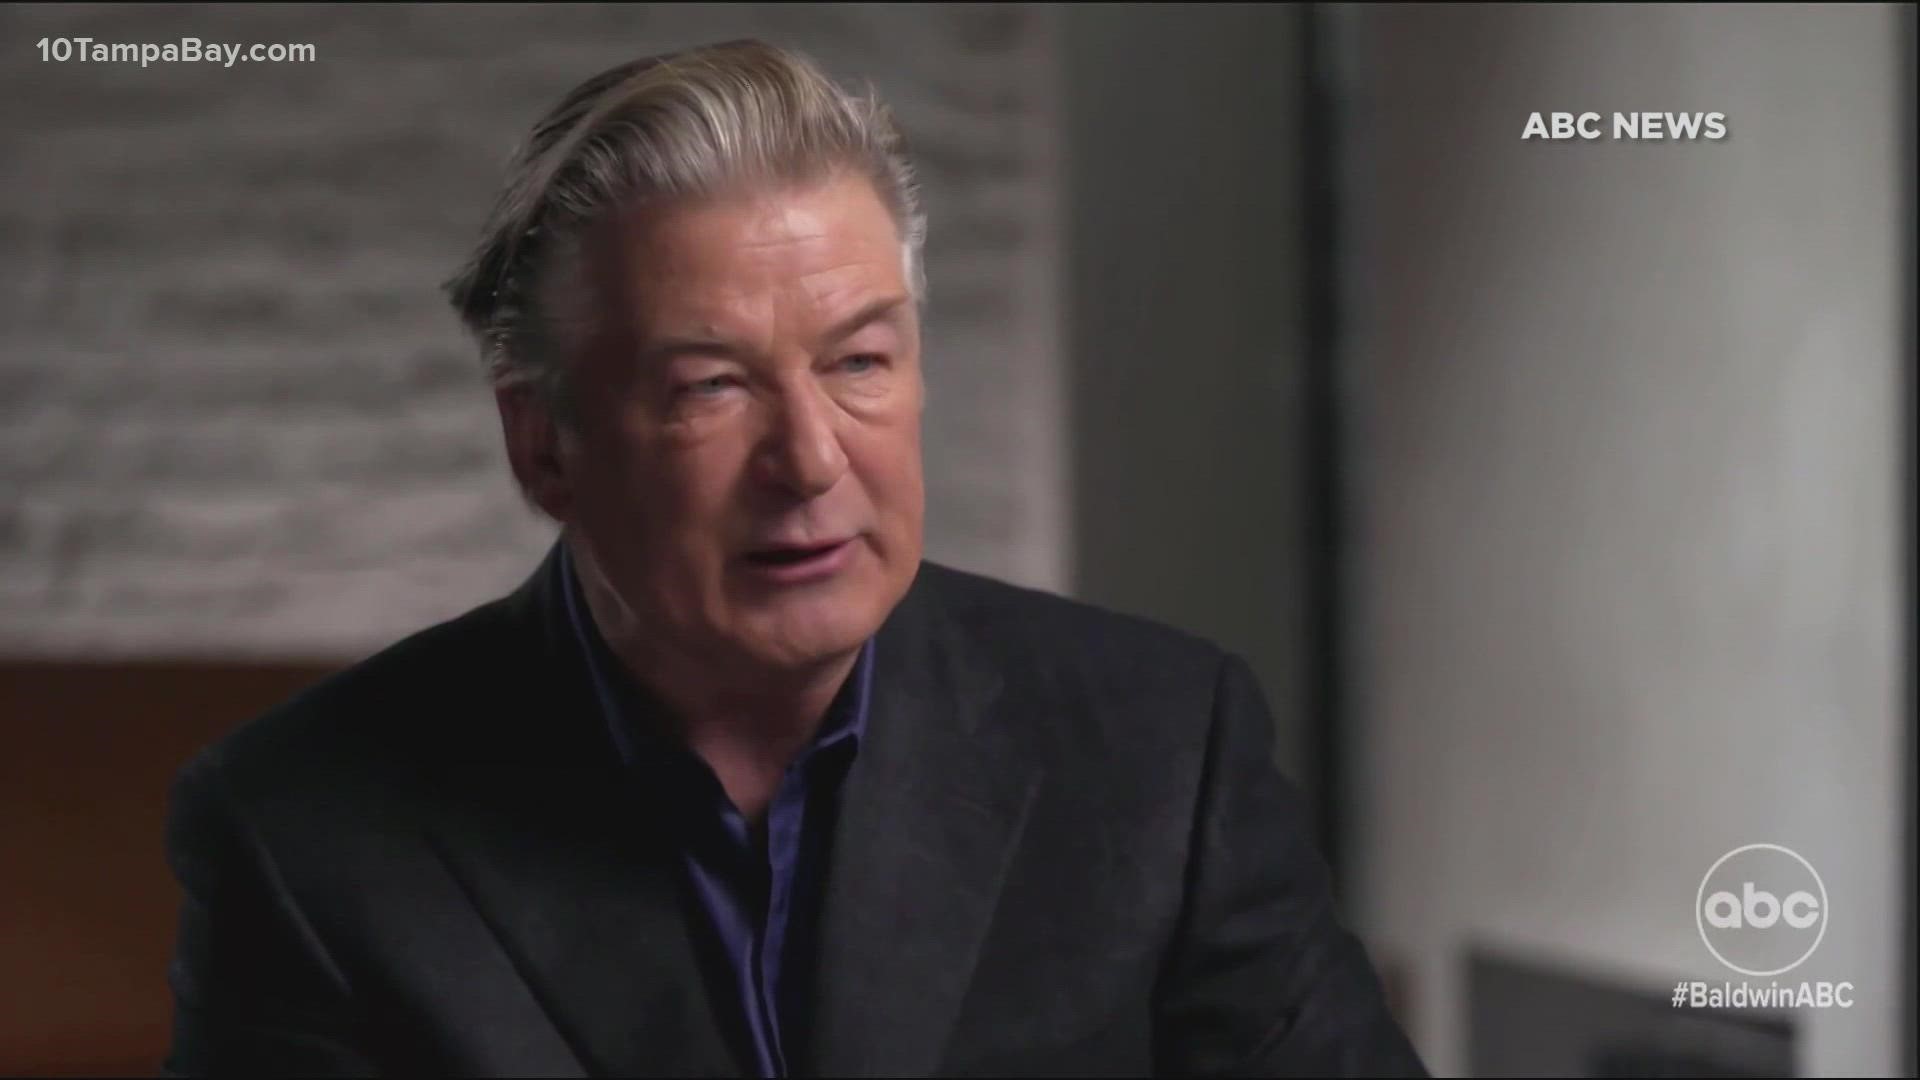 A clip of the interview shows Alec Baldwin breaking down in tears while describing Halyna Hutchins, the cinematographer who was killed on the set of "Rust."